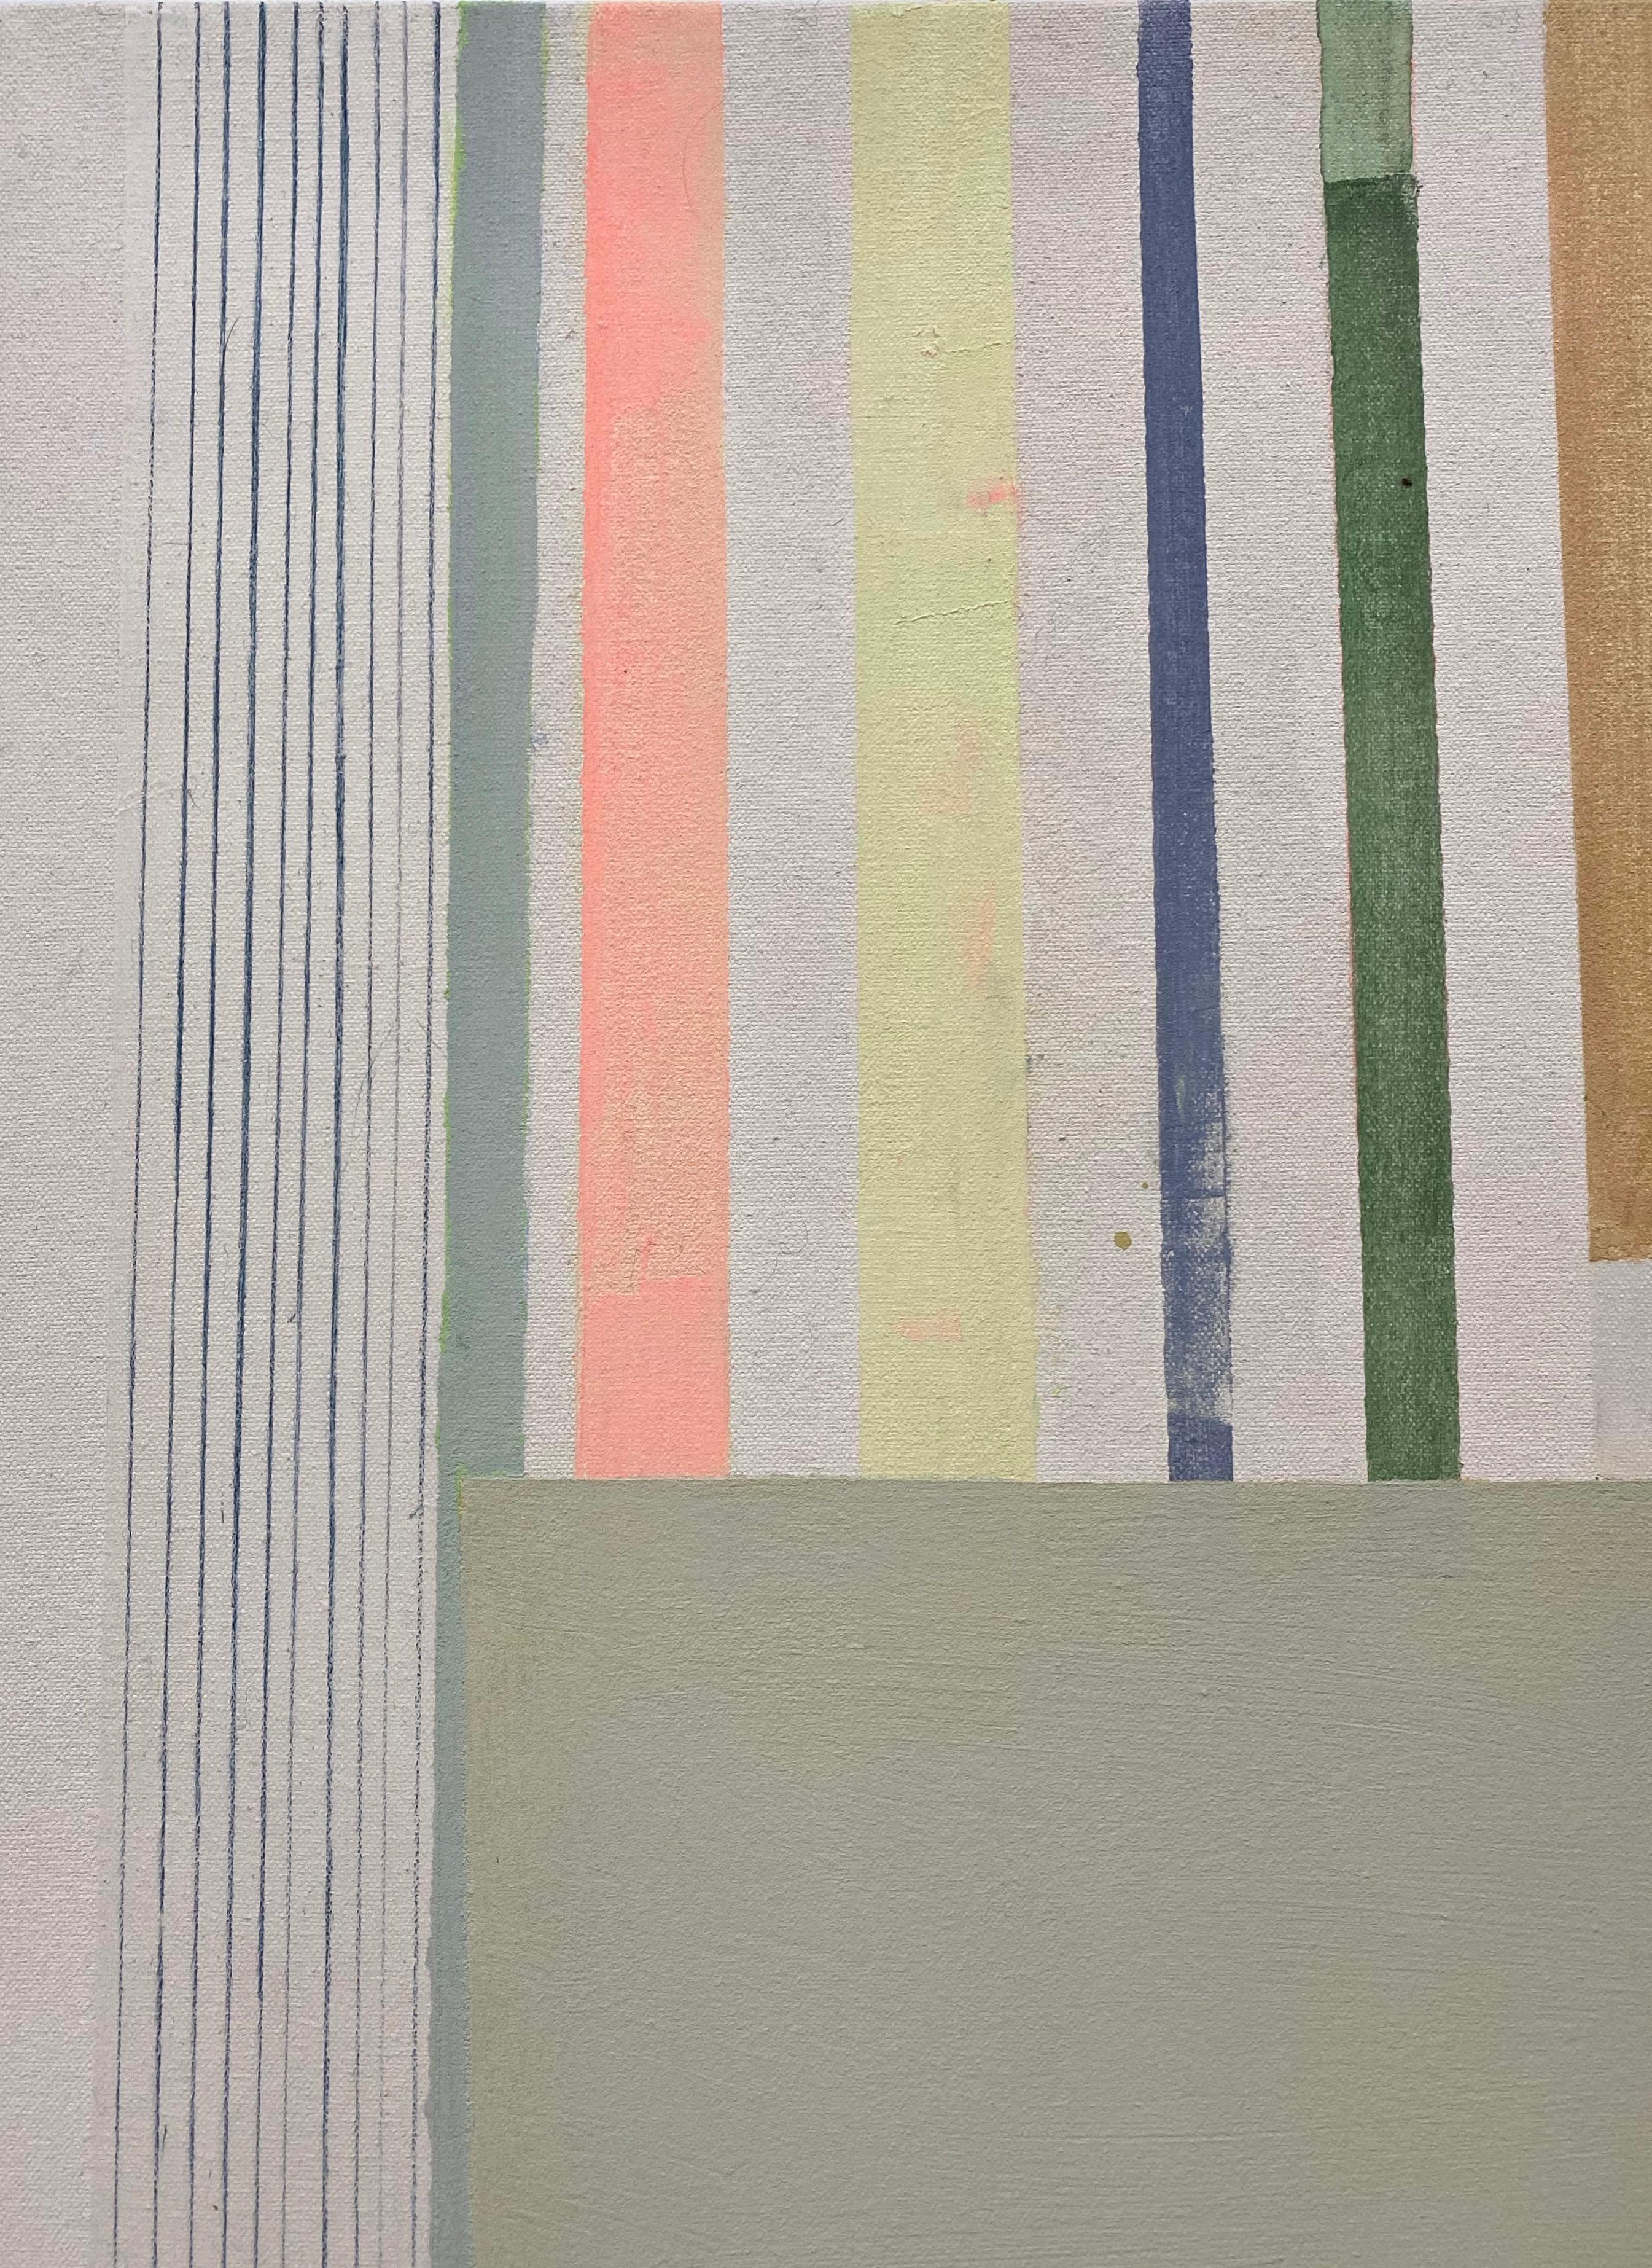 Ashgreylime, Beige, Light Green, Sage, Lemon Yellow Stripes, Geometric Abstract - Contemporary Painting by Elizabeth Gourlay